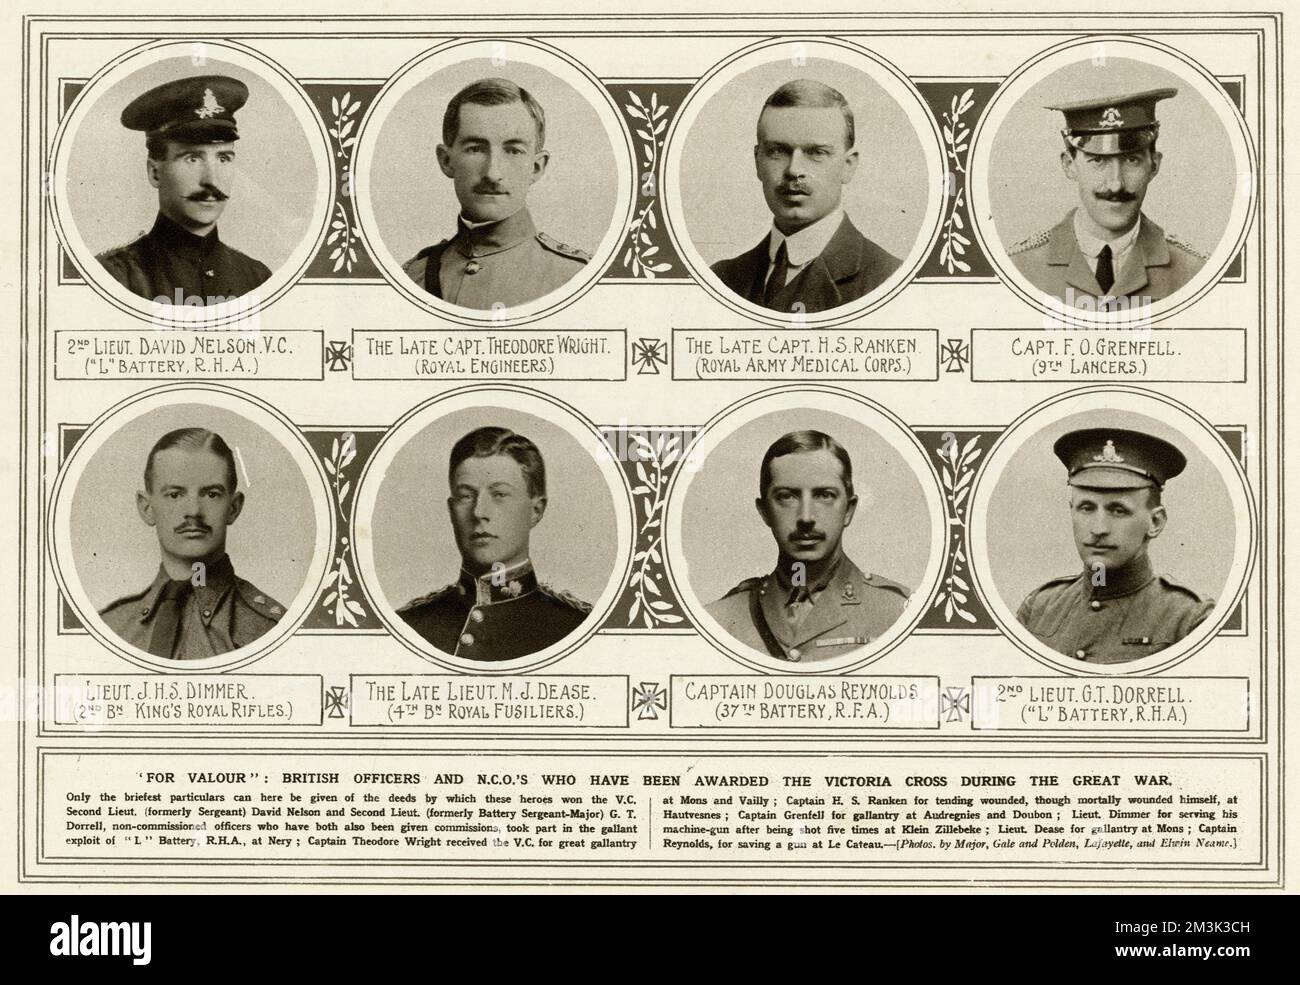 British Officers and N.C.O's, who were awarded Victoria Cross during WWI:  From top left: 2nd Lieut David Nelson V.C. ('L' Battery, R.H.A); Capt Theodore Wright. (Royal Engineers); Capt H.S. Ranken (Royal Army Medical Corps); Capt F.O. Grenfell (9th Lancers); Lieut J.H.S. Dimmer (2nd Bn King's Royal Rifles); Lieut M.J. Dease (4th Bn Royal Fusiliers); Capt Douglas Reynolds (37th Battery, R.F.A); 2nd Lieut G.T. Dorrell ('L' Battery, R.H.A.)  1914 Stock Photo